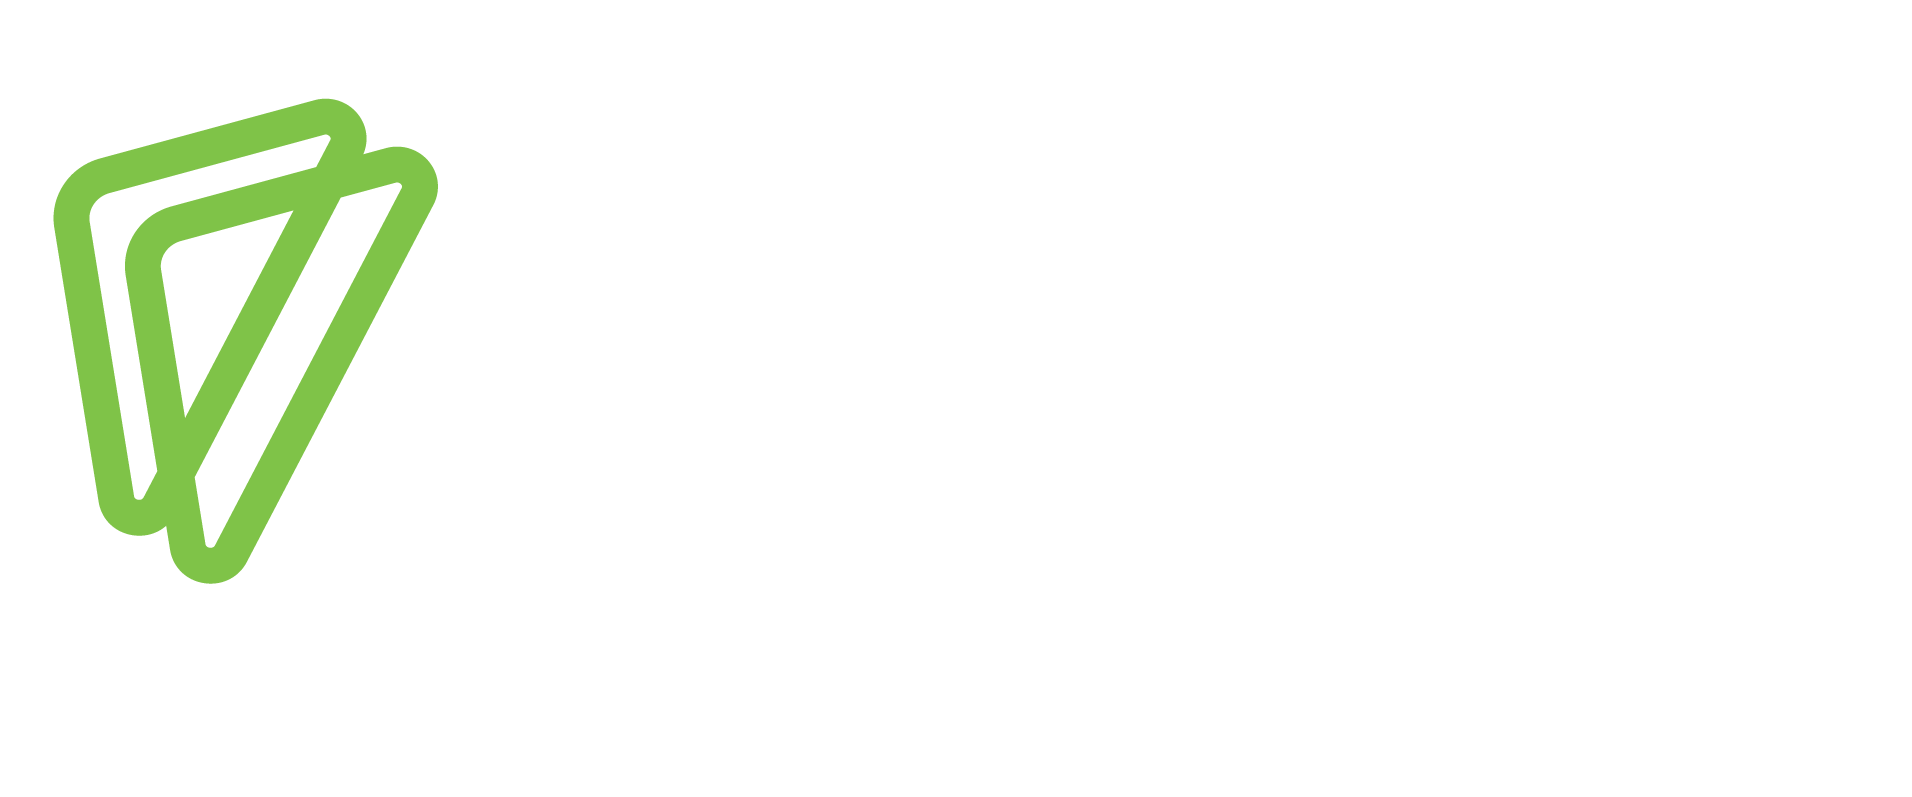 CAA - Consejo Agroindustrial Argentino